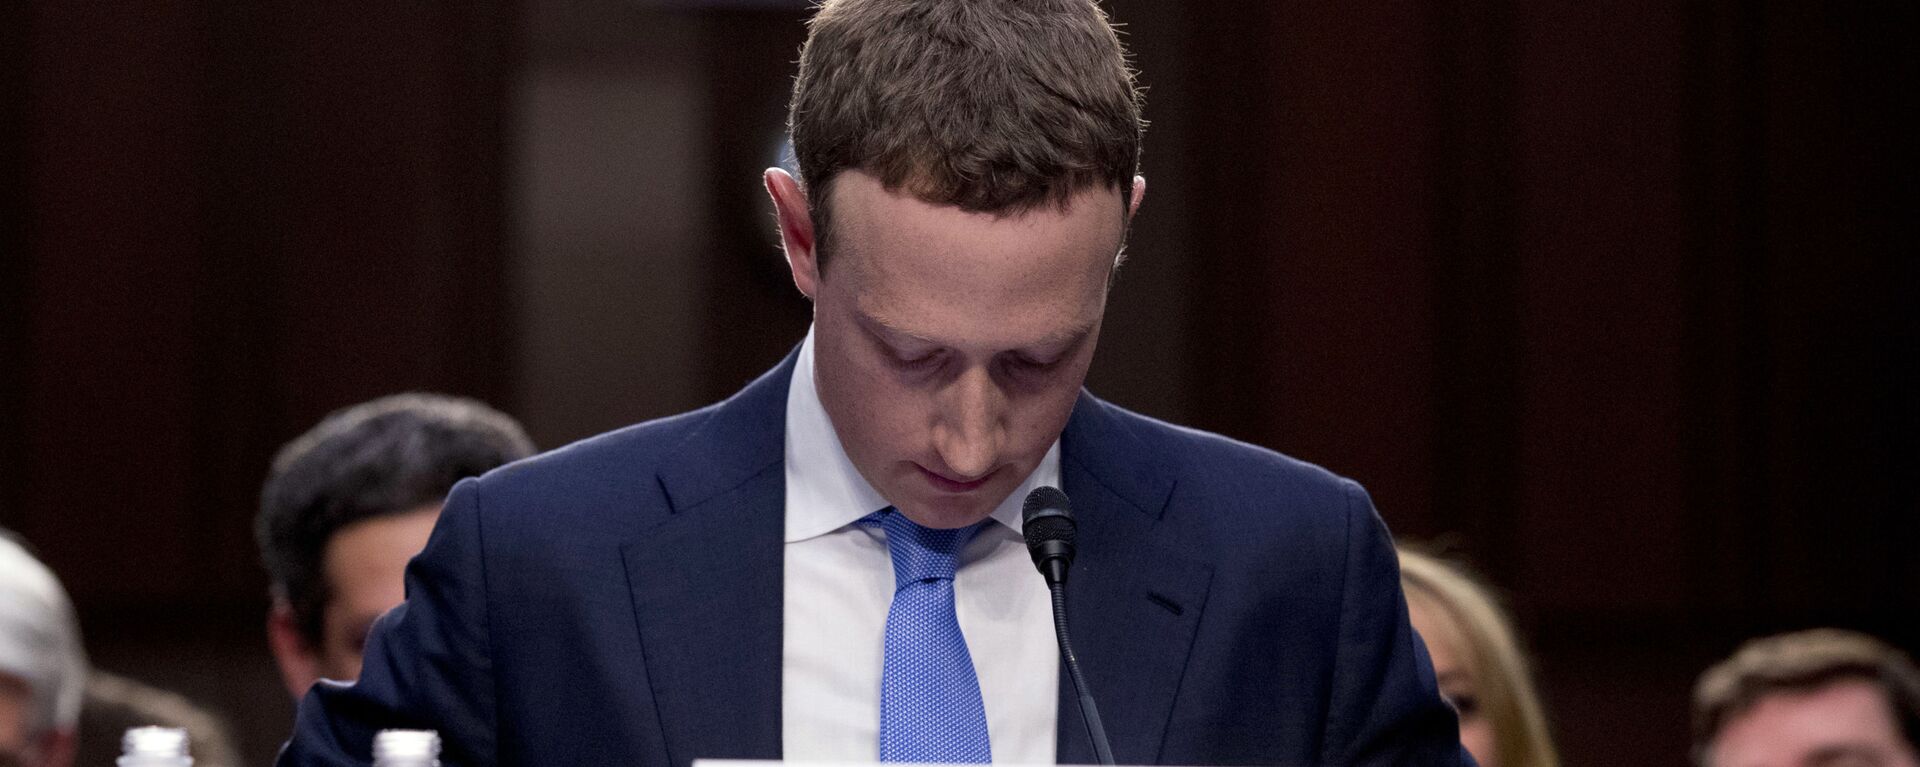 In this April 10, 2018, file photo Facebook CEO Mark Zuckerberg looks down as a break is called during his testimony before a joint hearing of the Commerce and Judiciary Committees on Capitol Hill in Washington. - Sputnik International, 1920, 26.10.2021